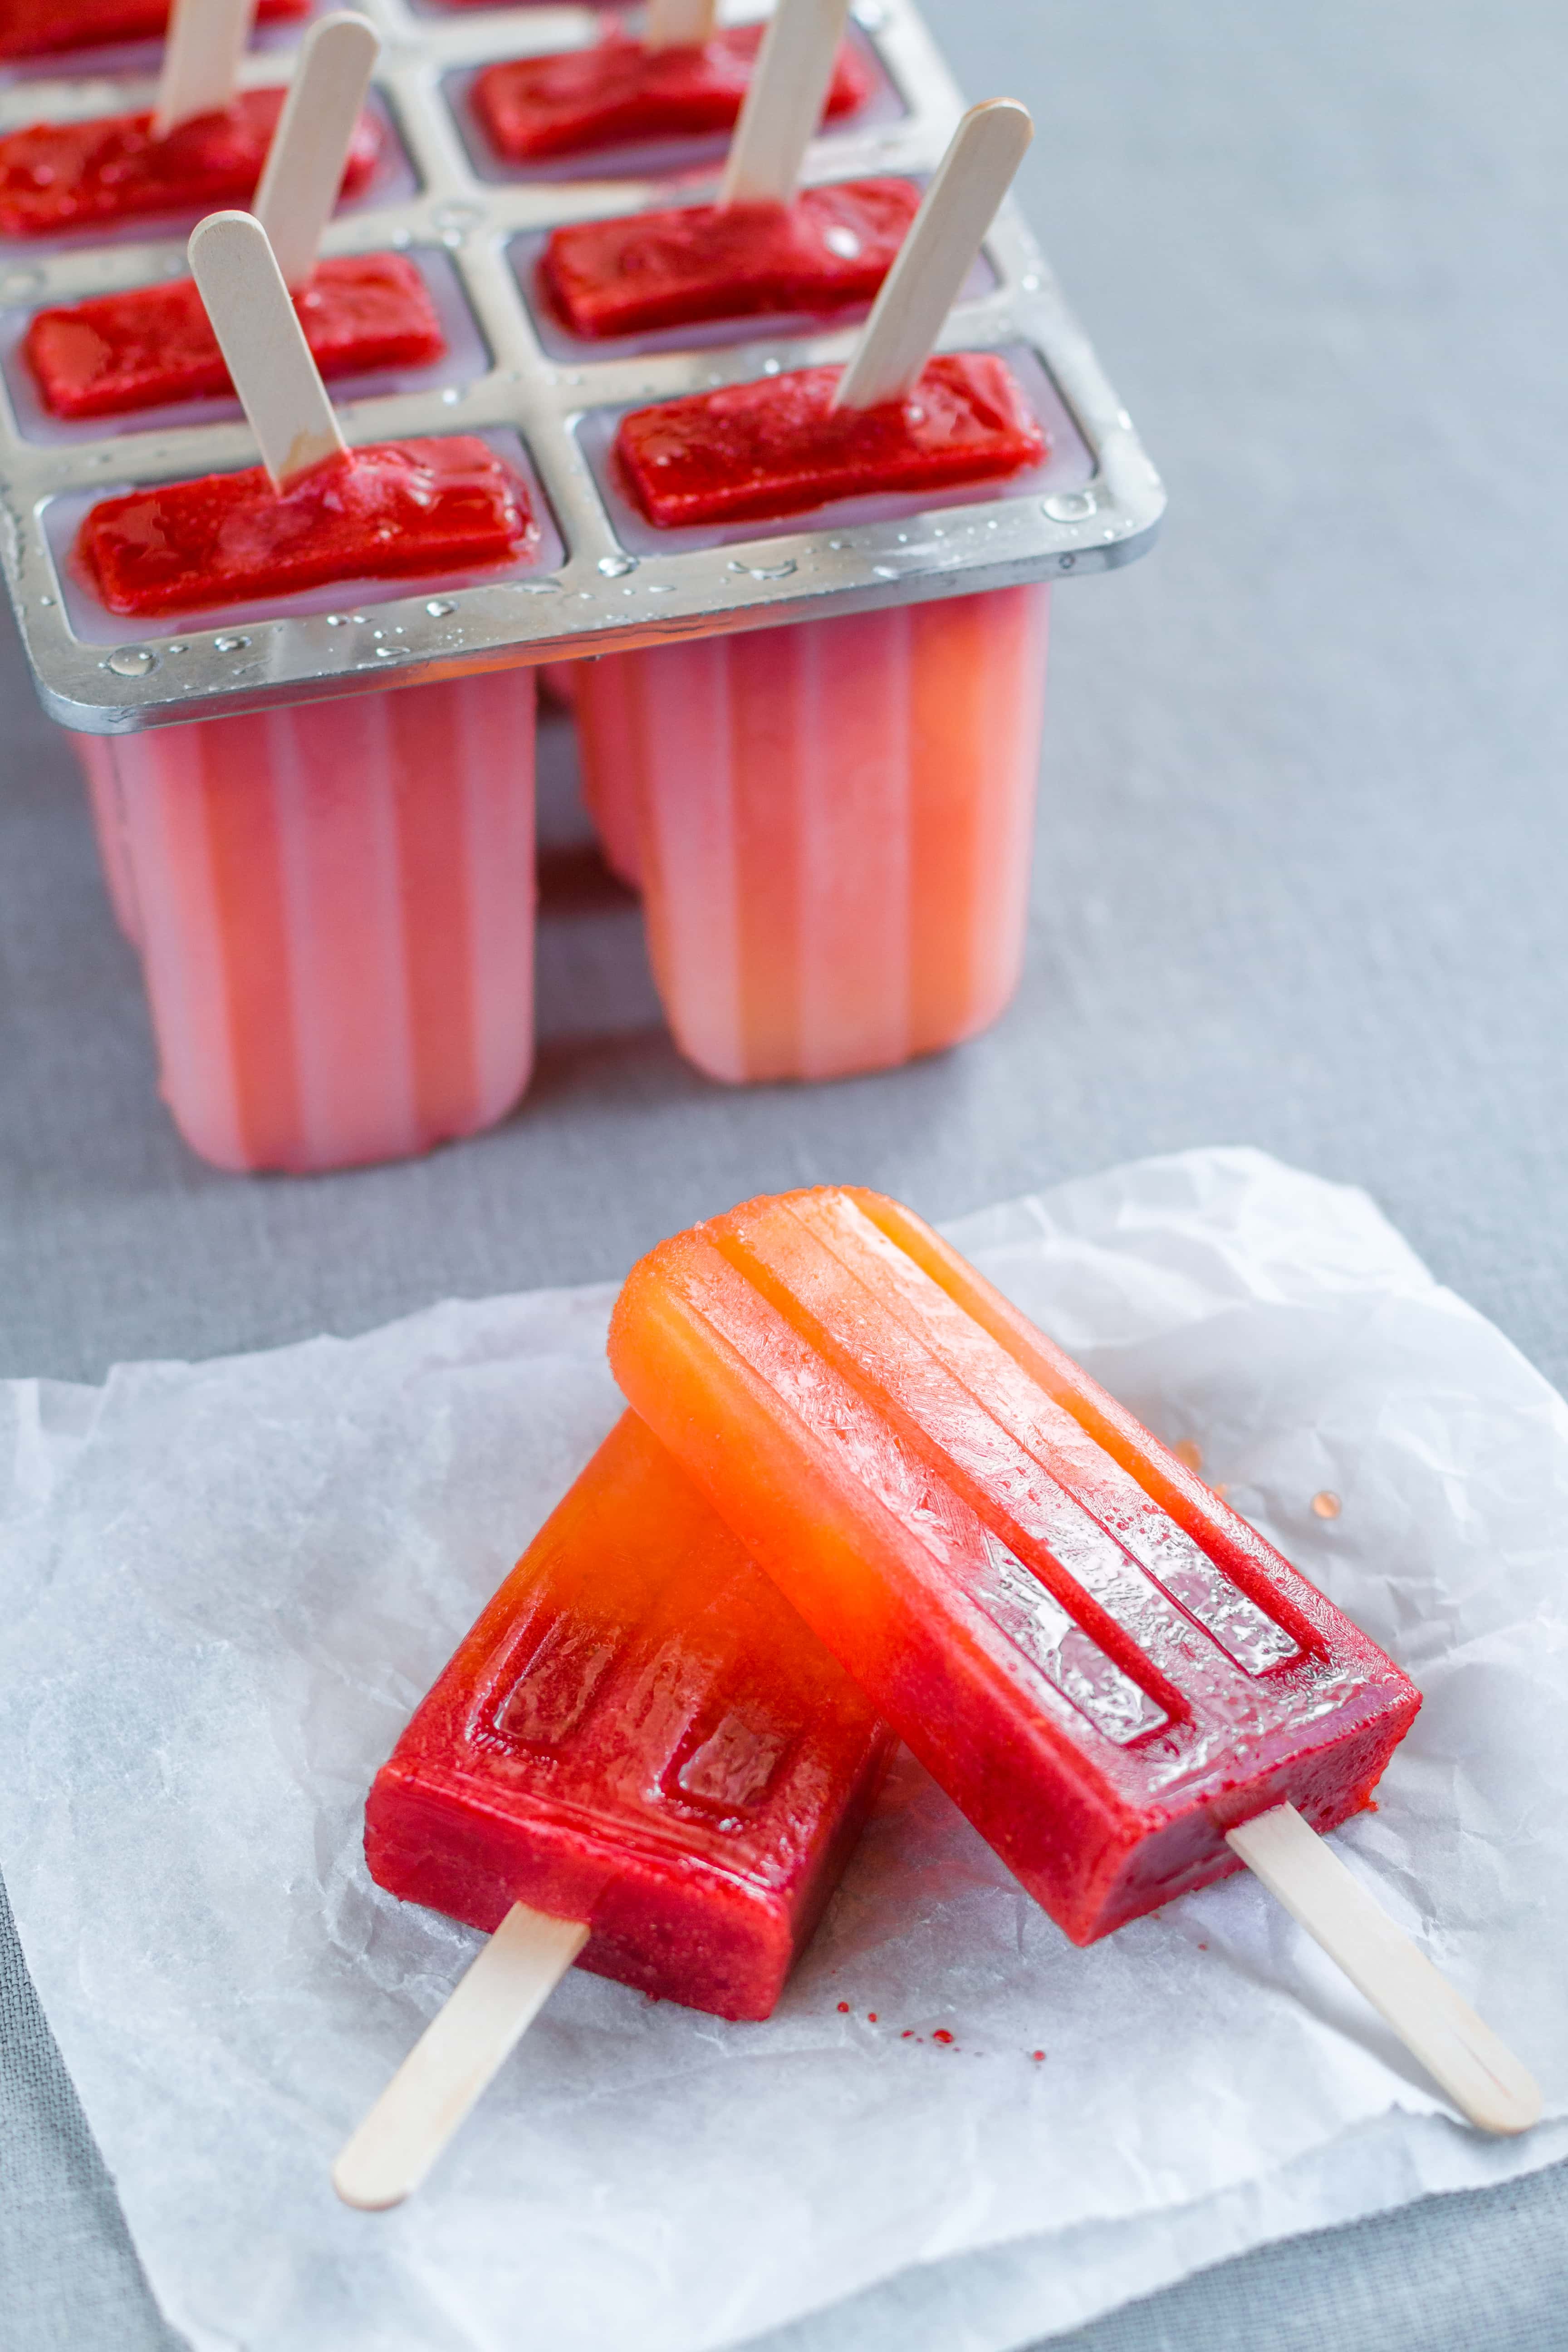 Orange Strawberry Sunrise Popsicles on grey table cloth. Six popsicles still in the popsicle molds on the top left coming out of the frame. In the middle, there are two popsicles lying on some parchment paper in front of the popsicles in the molds.